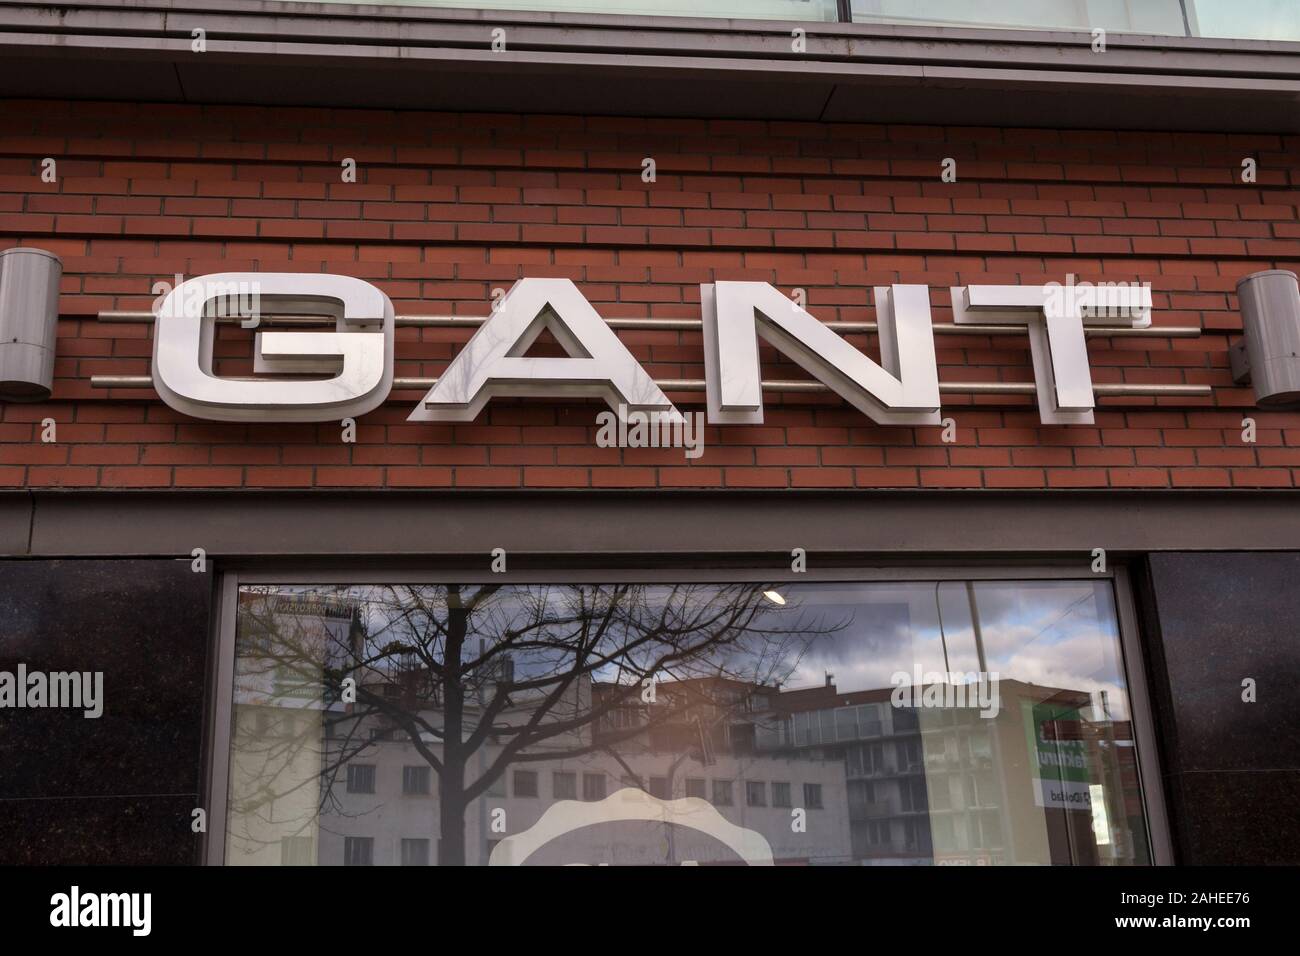 Gant Shop Store High Resolution Stock Photography and Images - Alamy